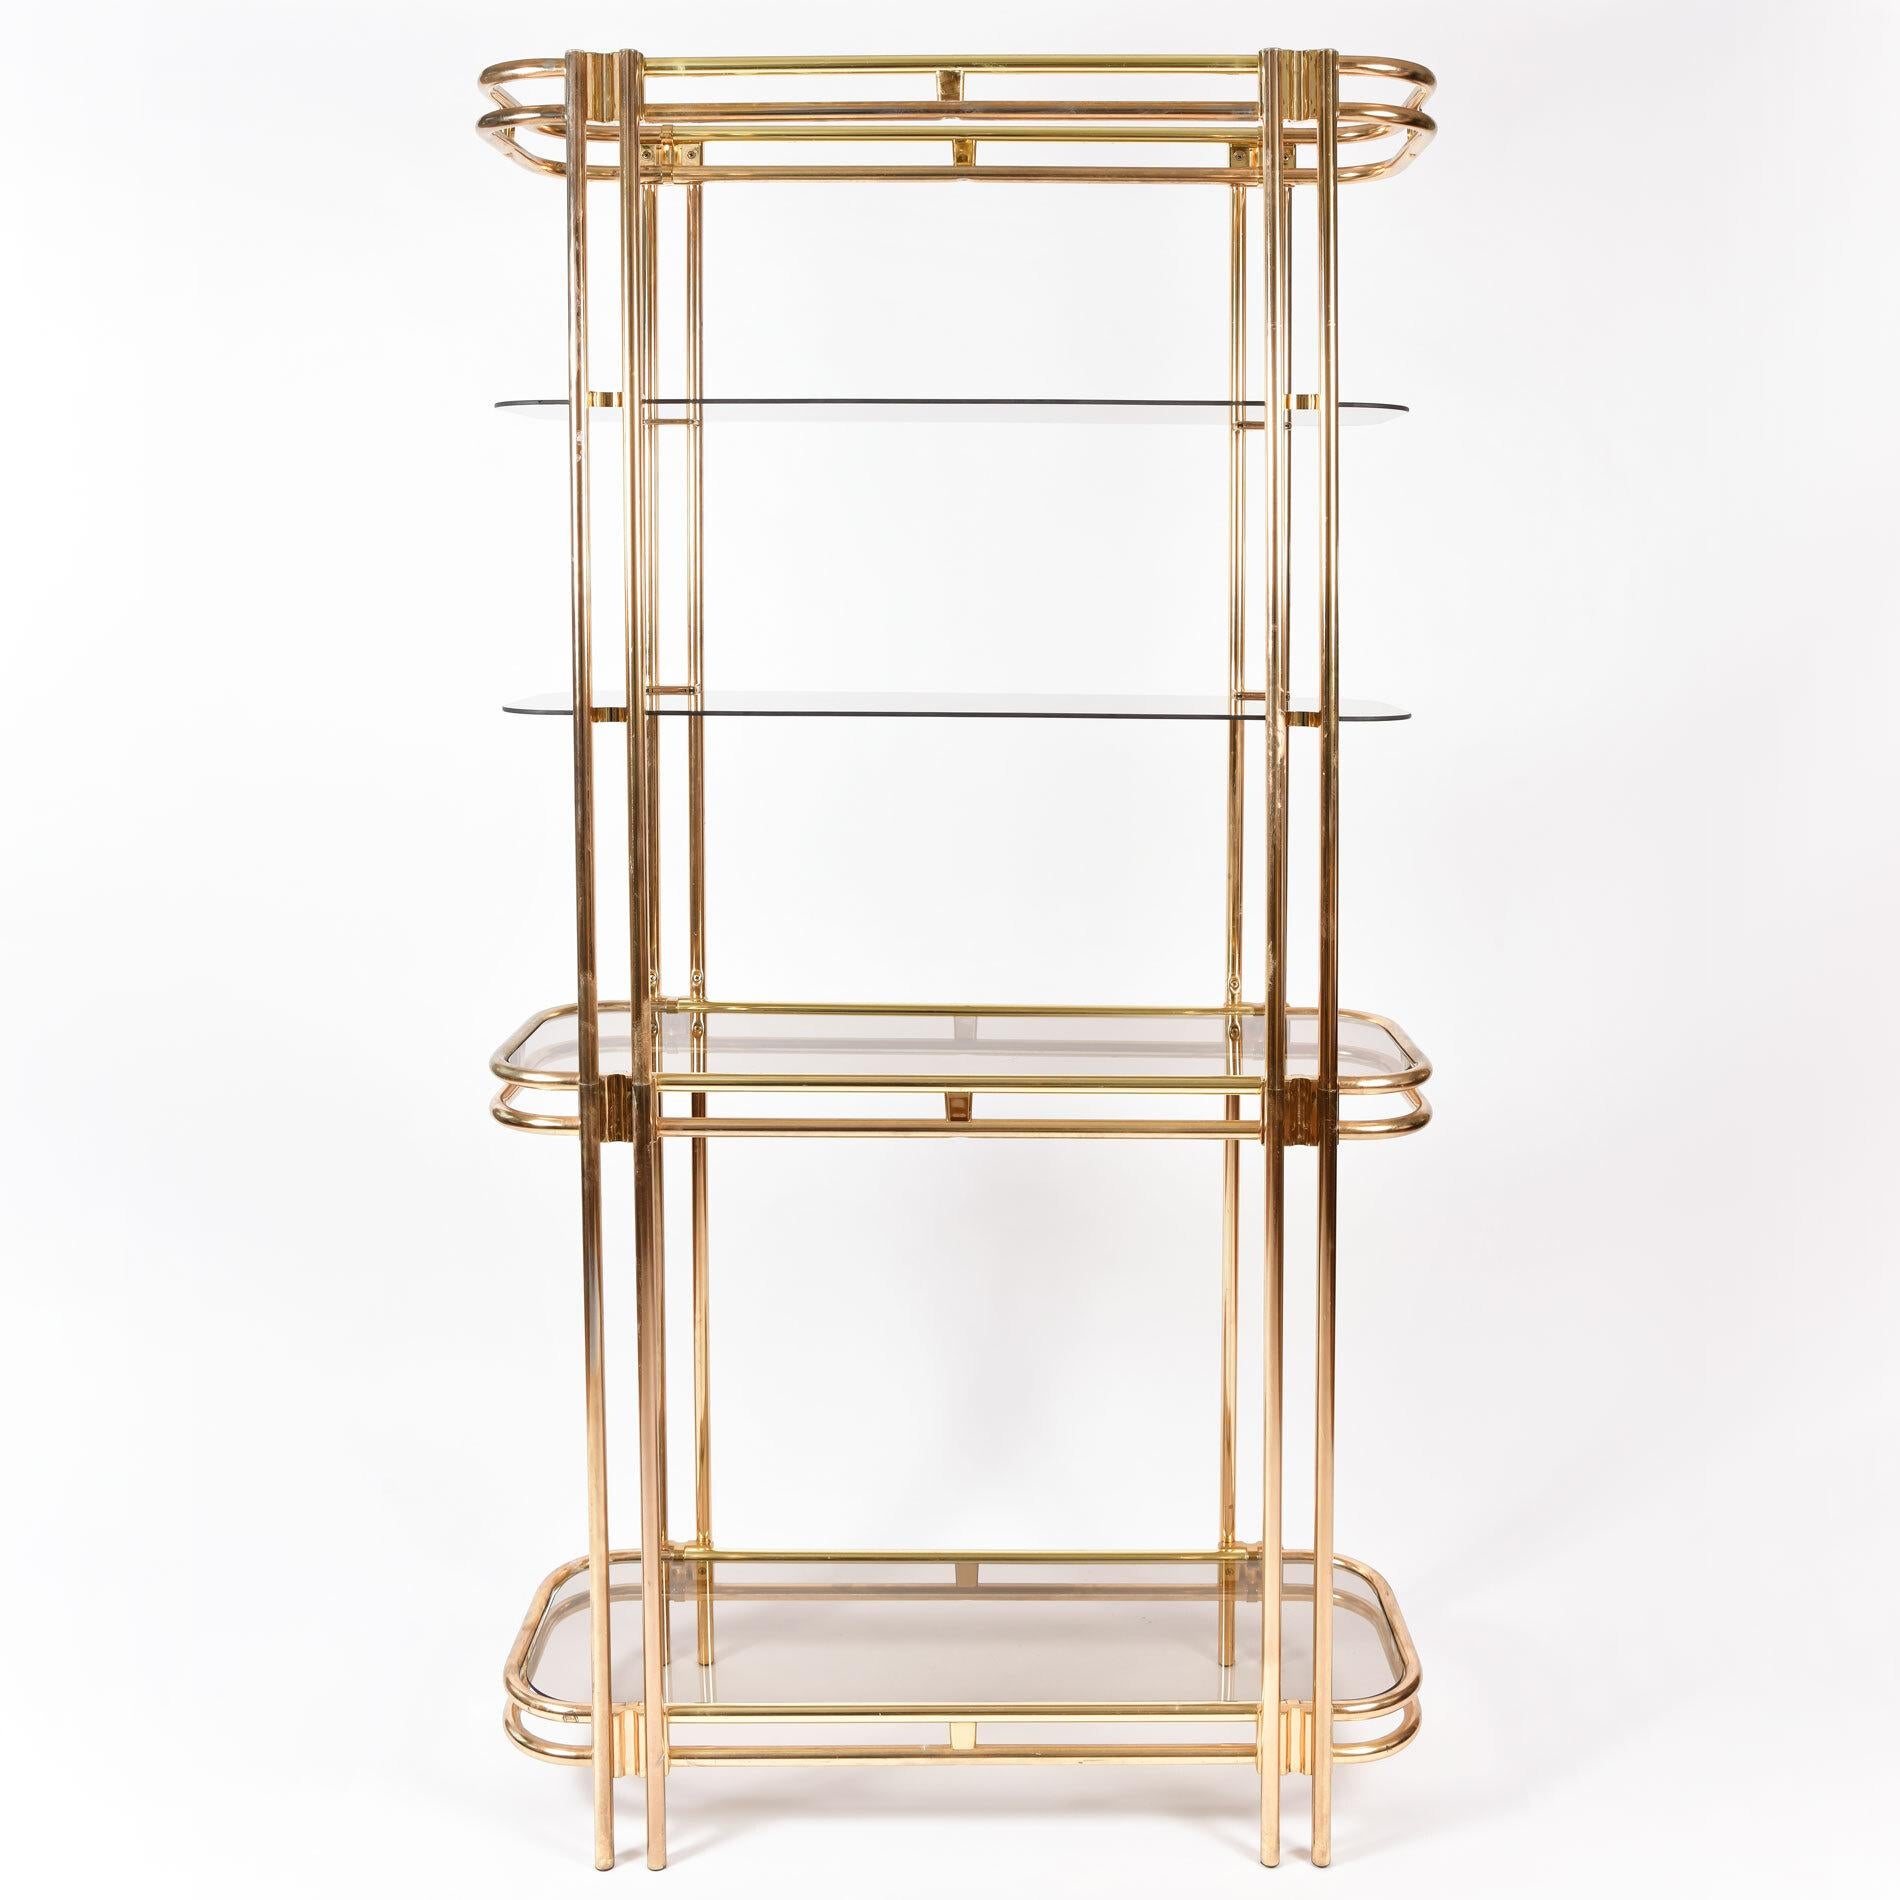 Tall 1970s American brass and glass shelving unit.

Curved brass frame with three levels of double brass shelving and two levels of single glass shelving.